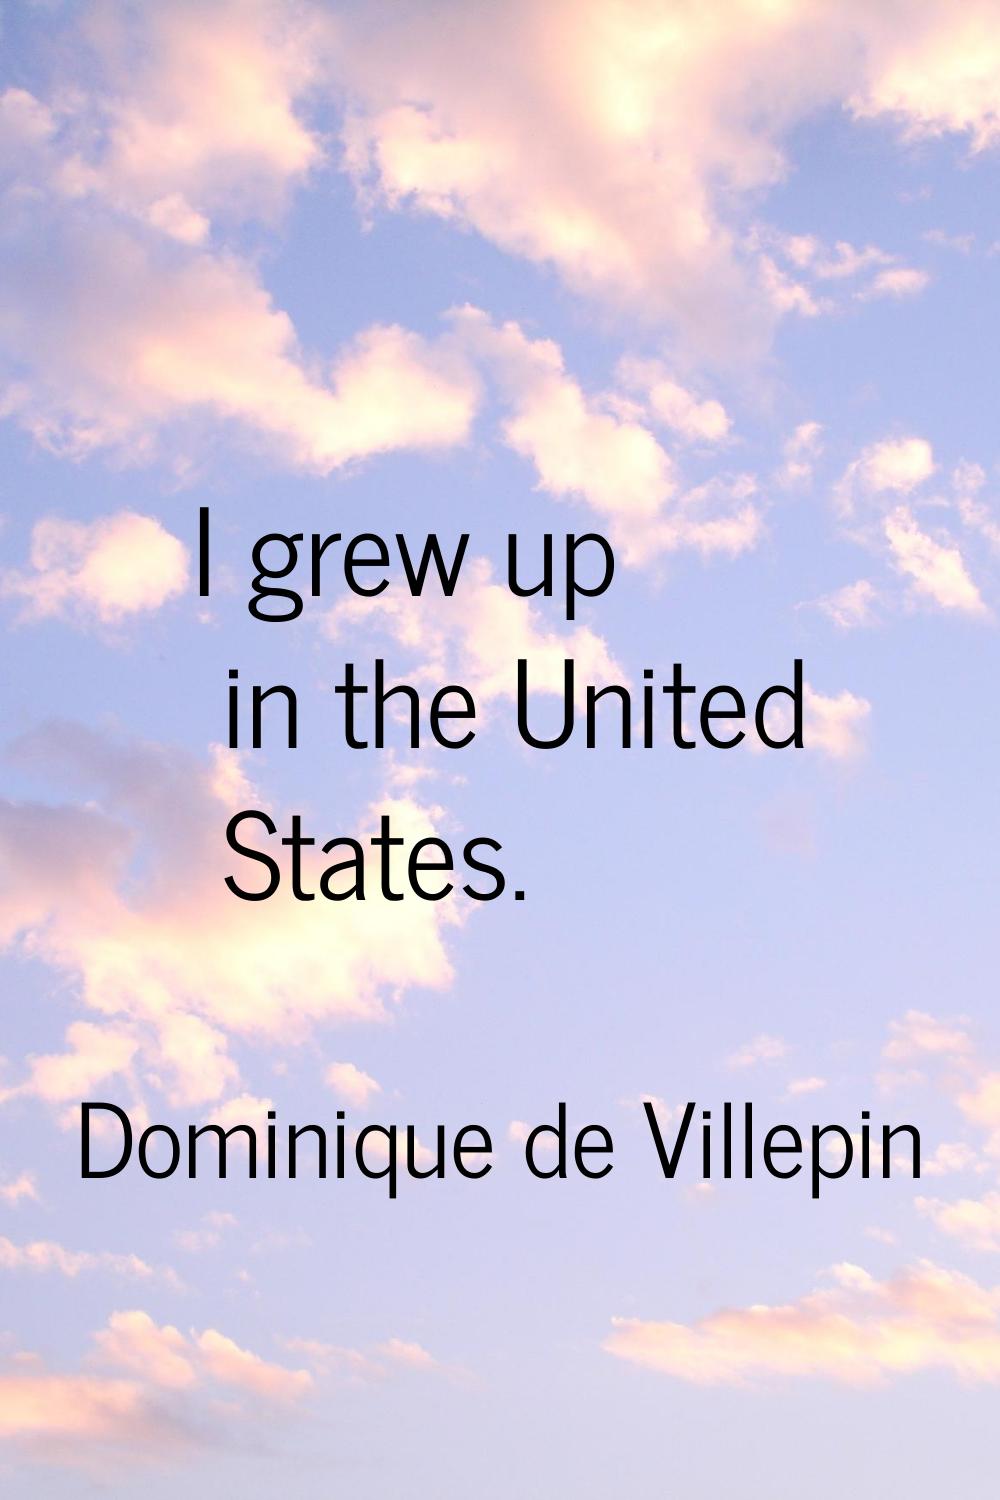 I grew up in the United States.